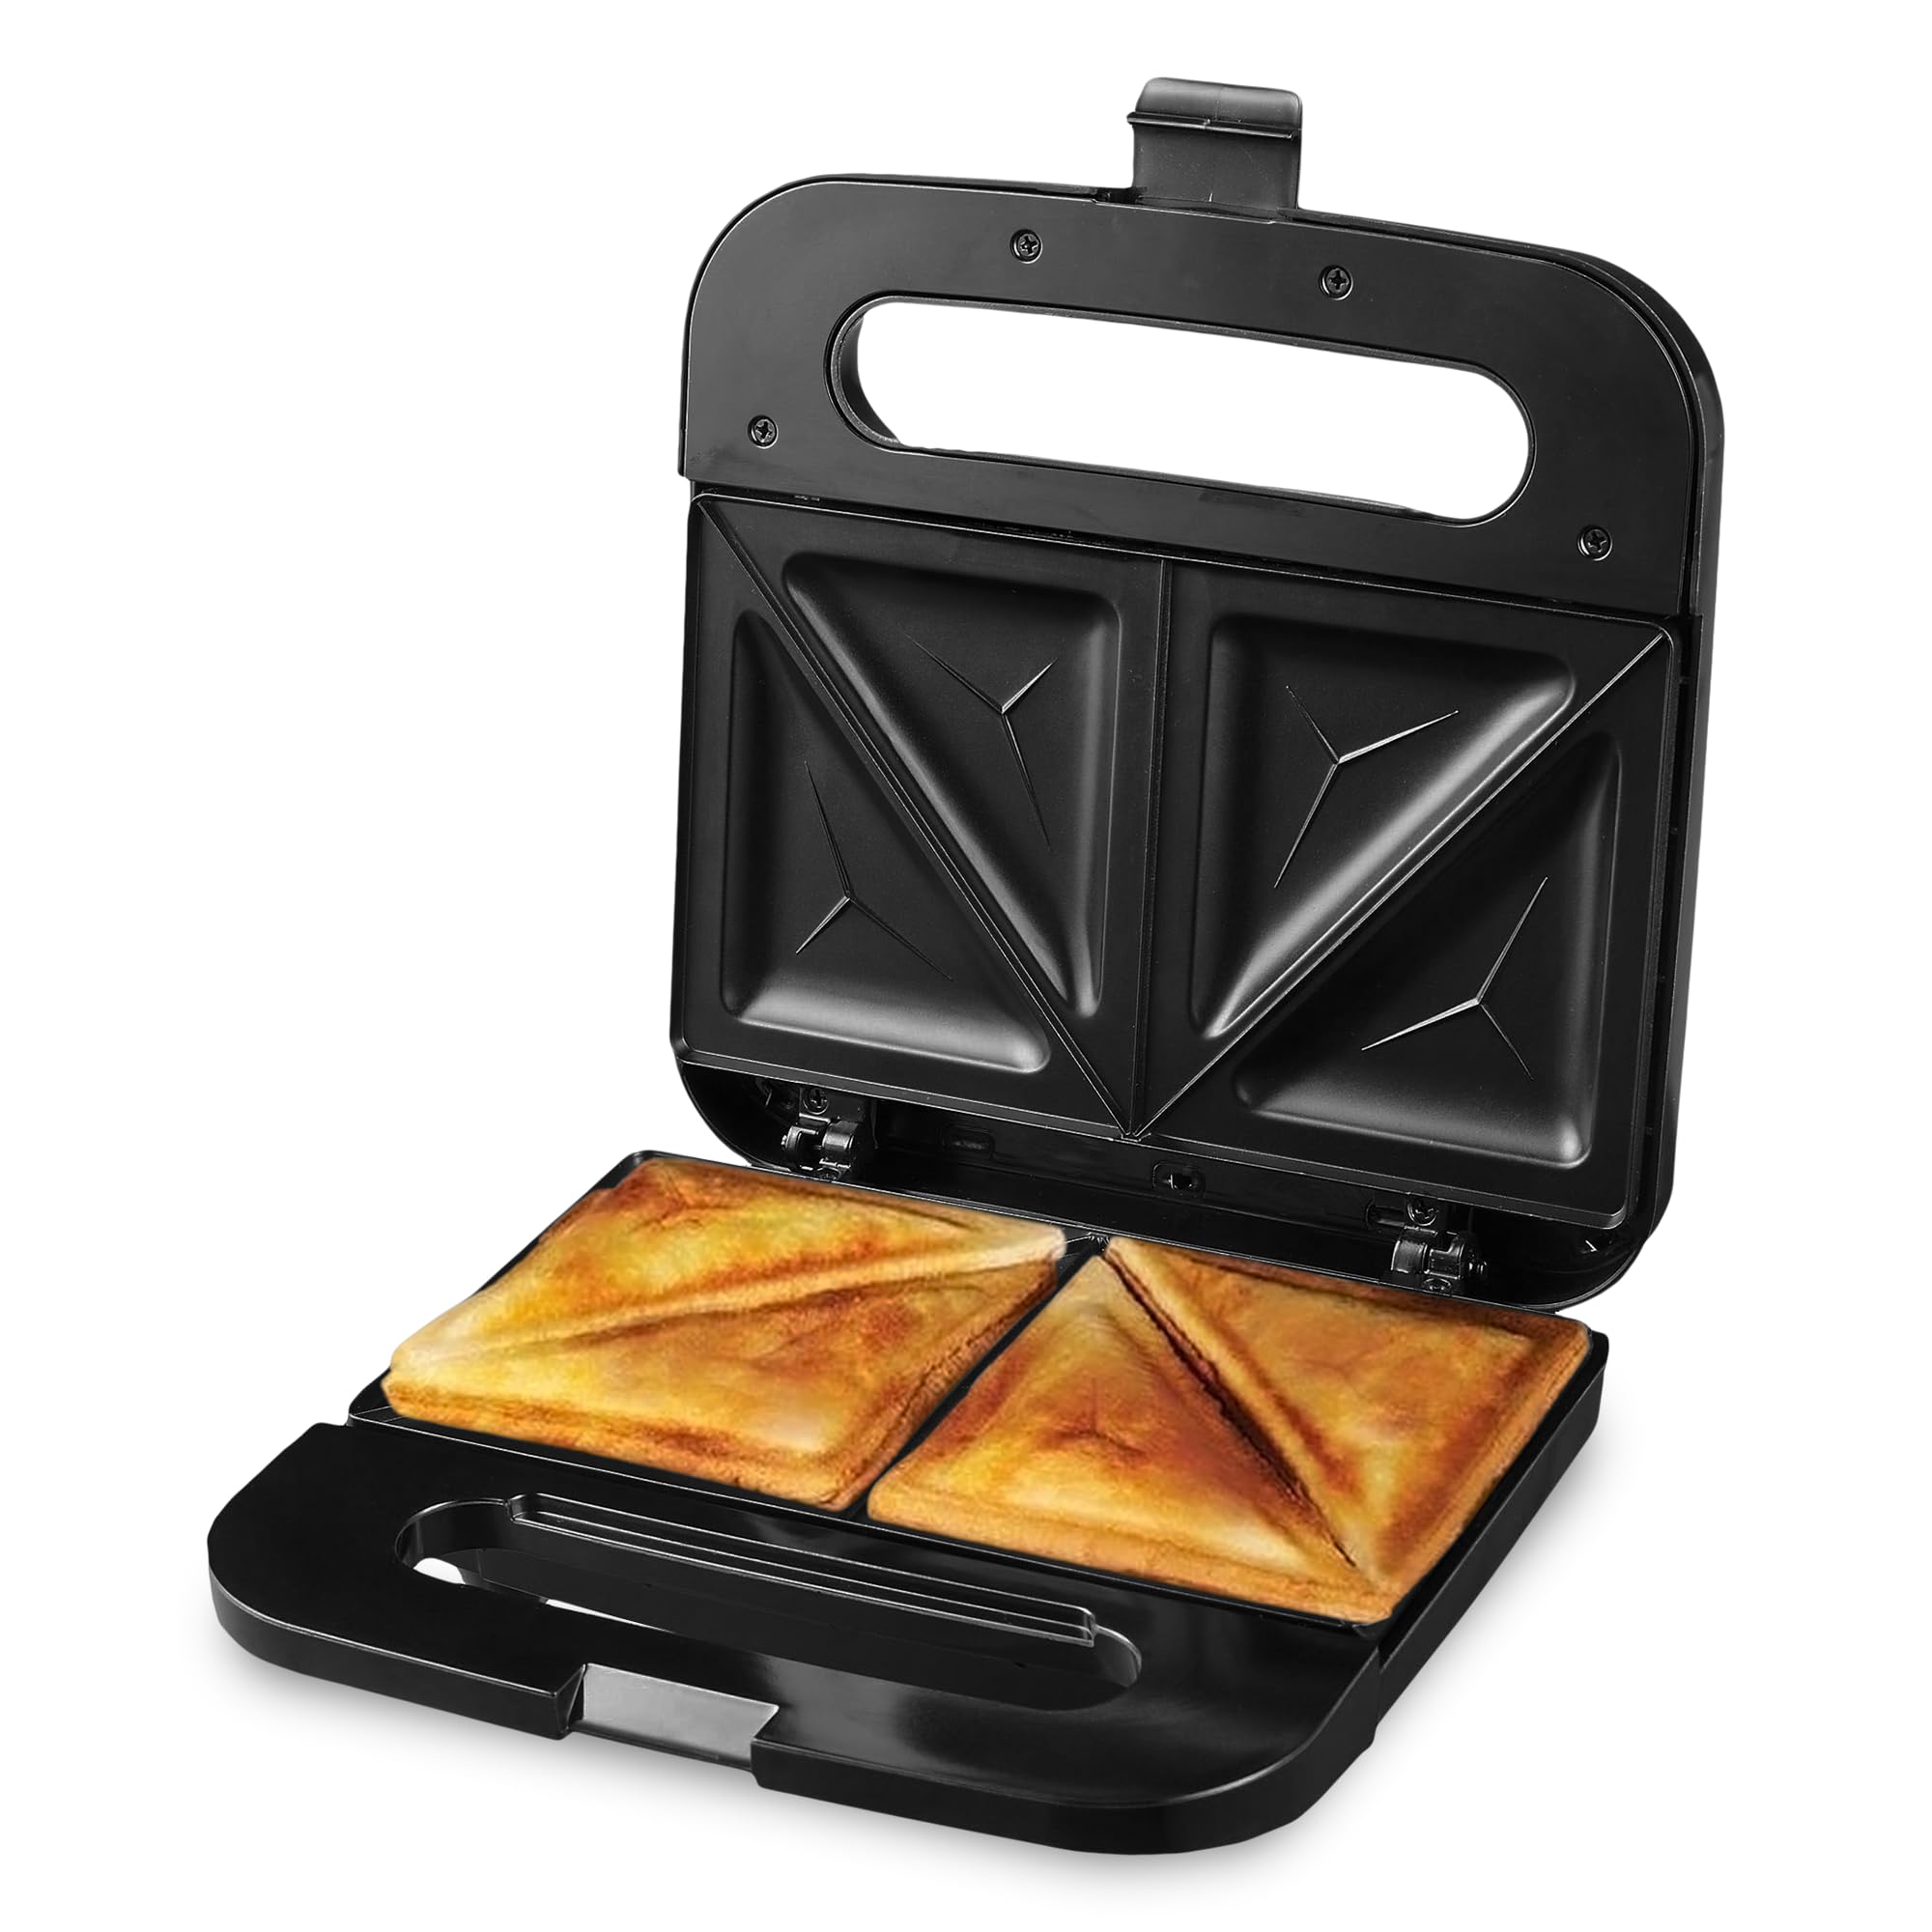 OVENTE Electric Sandwich Maker w/ Non-Stick Plates $11.69 + Free Shipping w/ Prime or on orders over $35